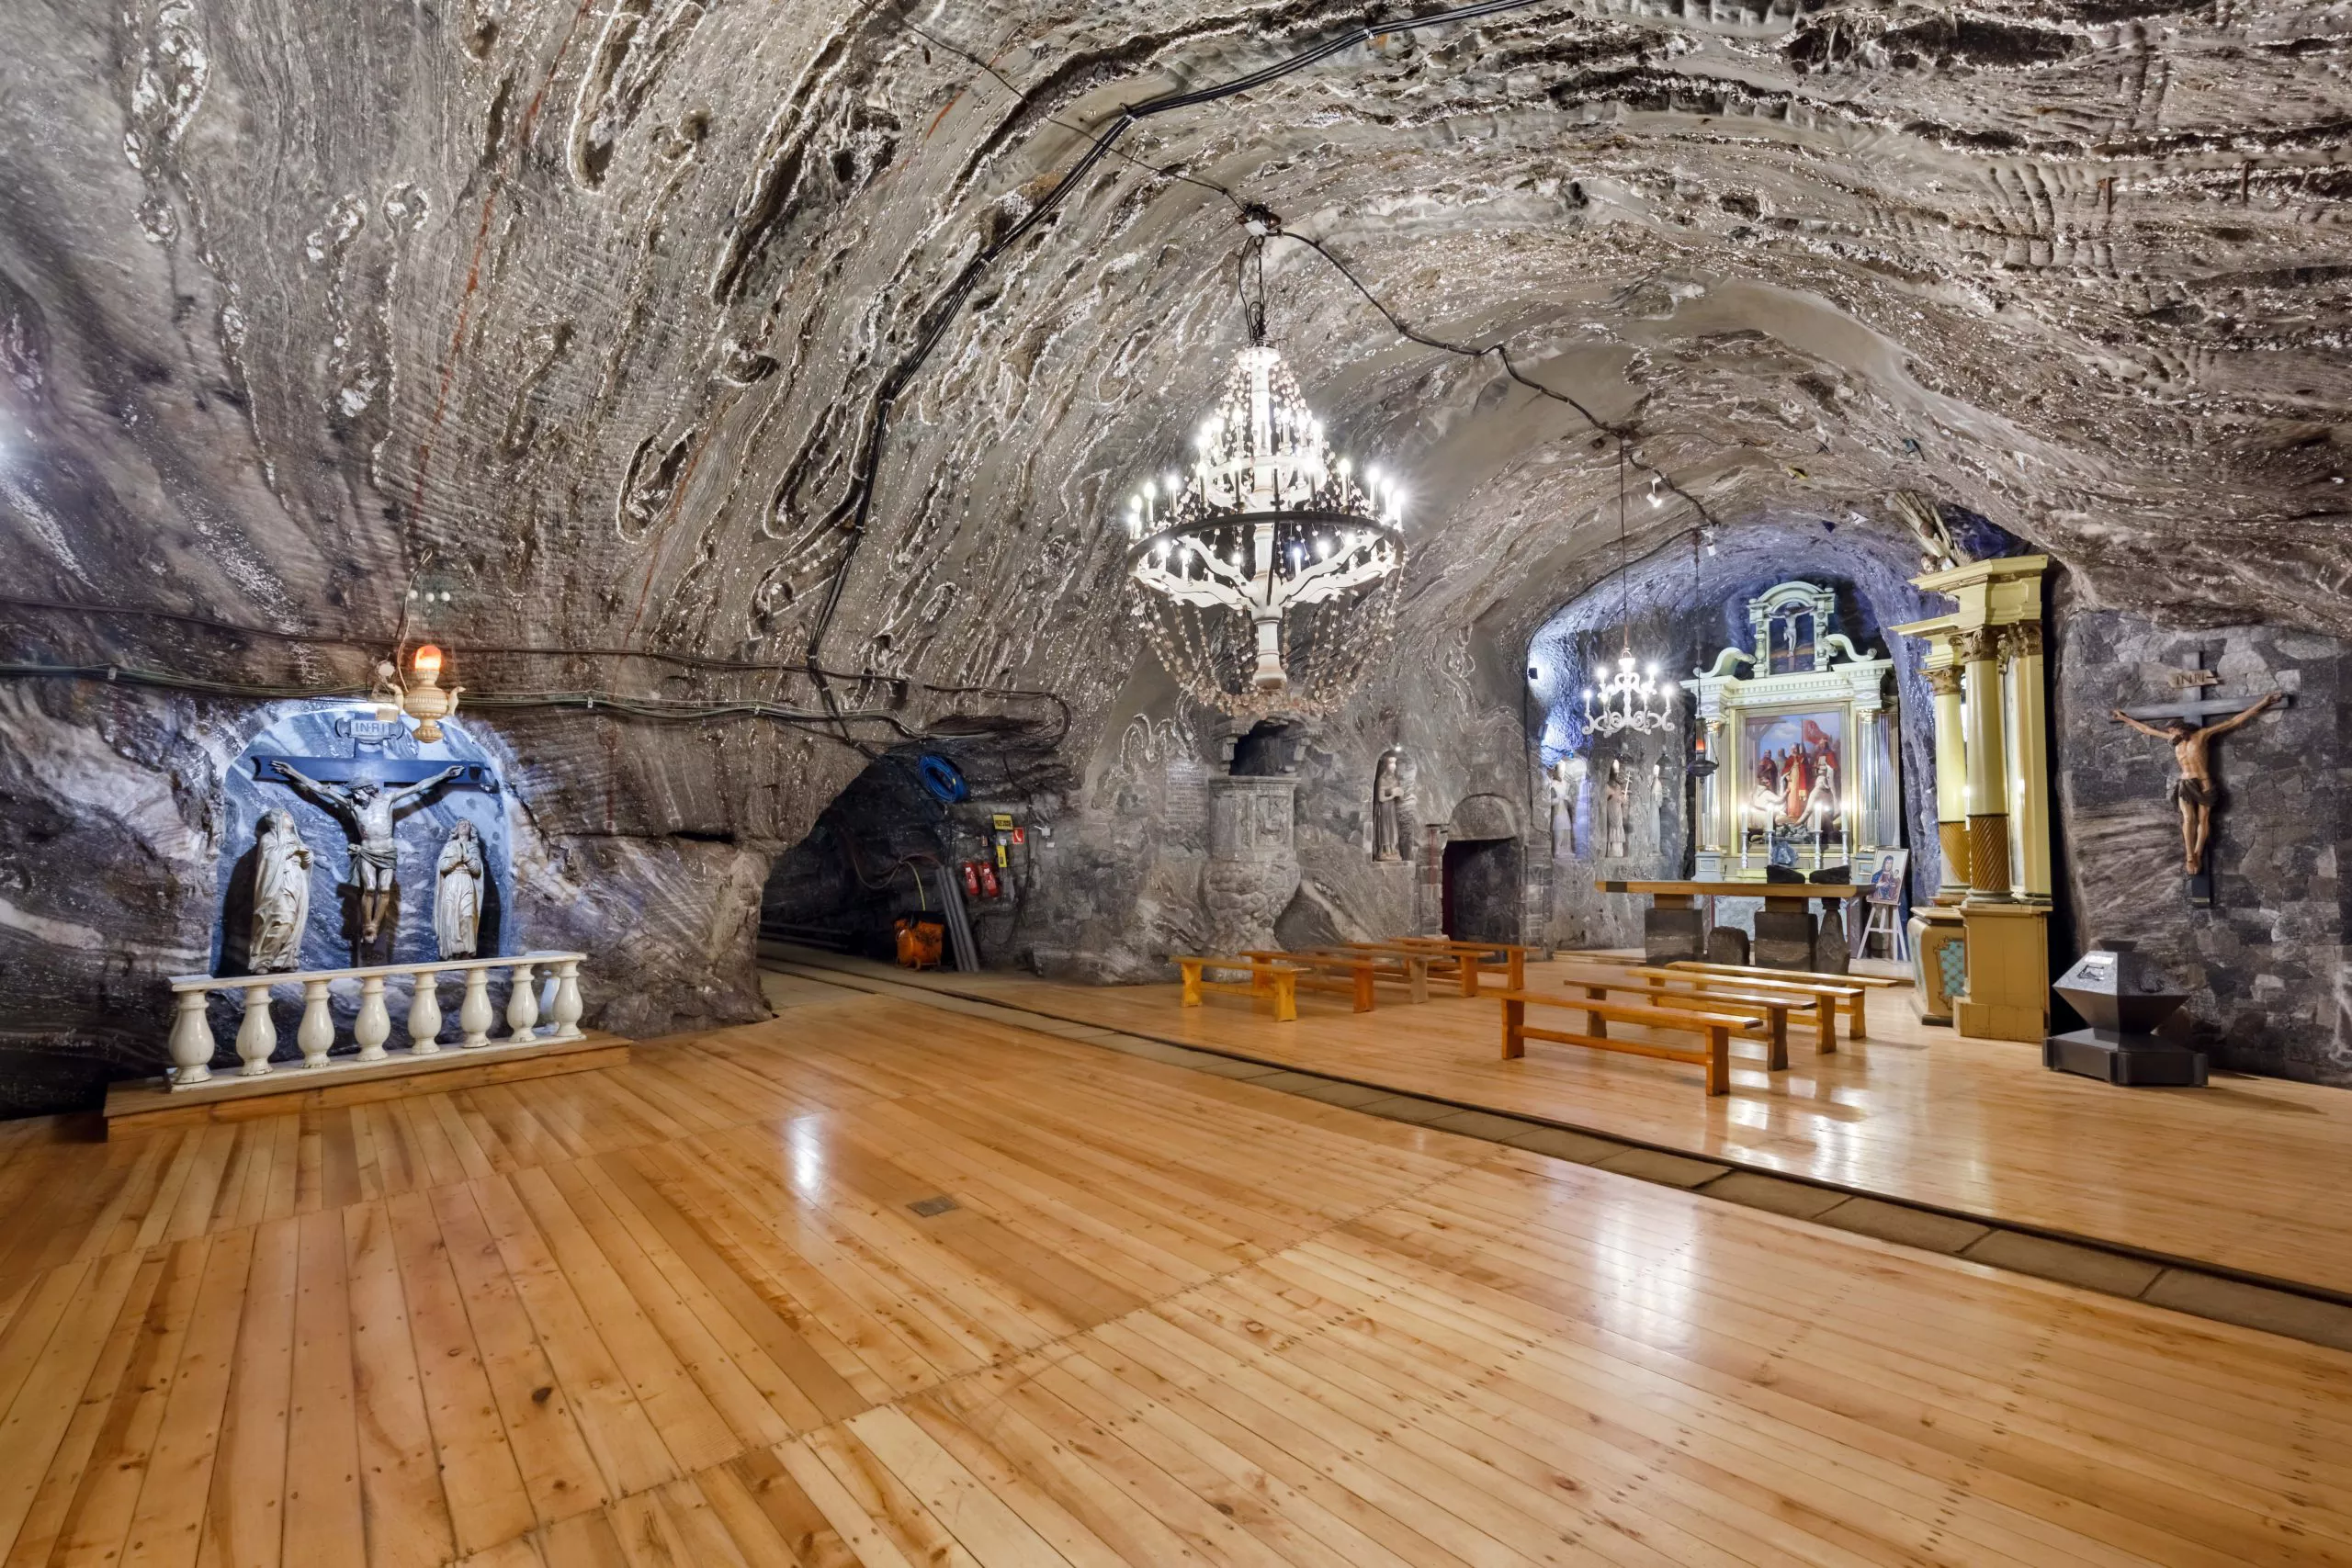 Chapel of St Kinga in a salt mine: an expanse of polished wooden floor under a swathe of stripped grey rock salt forming the walls and ceiling, from which an impressive chandelier hangs. The chapel is furnished with a small crucifixion scene on the left and a prayer area with wooden benches in front of an altar arranged in a niche on the right.